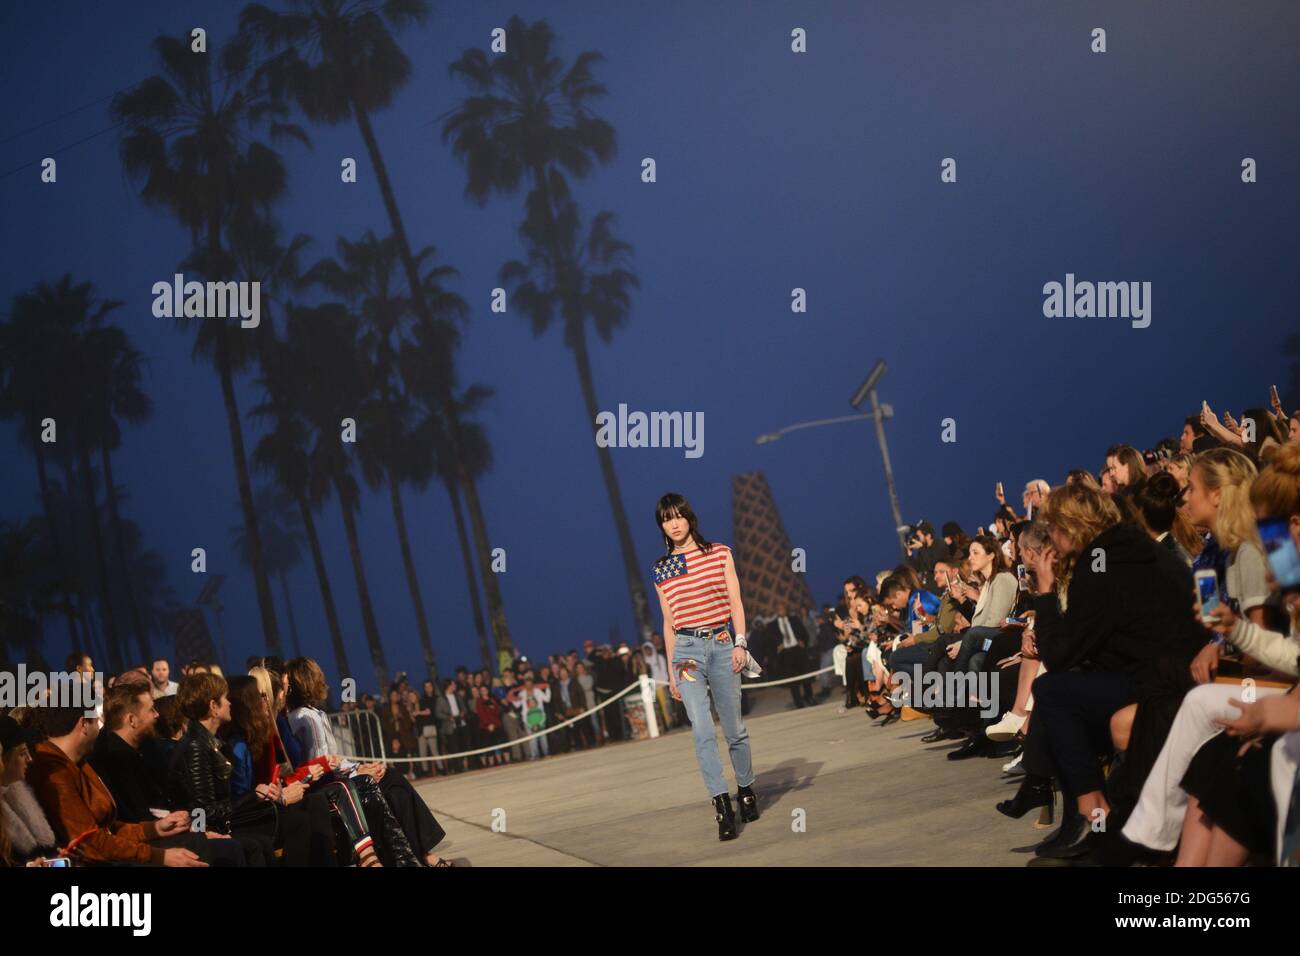 Sora Choi walks the runway at the TommyLand Tommy Hilfiger Spring 2017  Fashion Show on February 8, 2017 in Venice, Los Angeles, CA, USA. Photo by  Lionel Hahn/ABACAPRESS.COM Stock Photo - Alamy